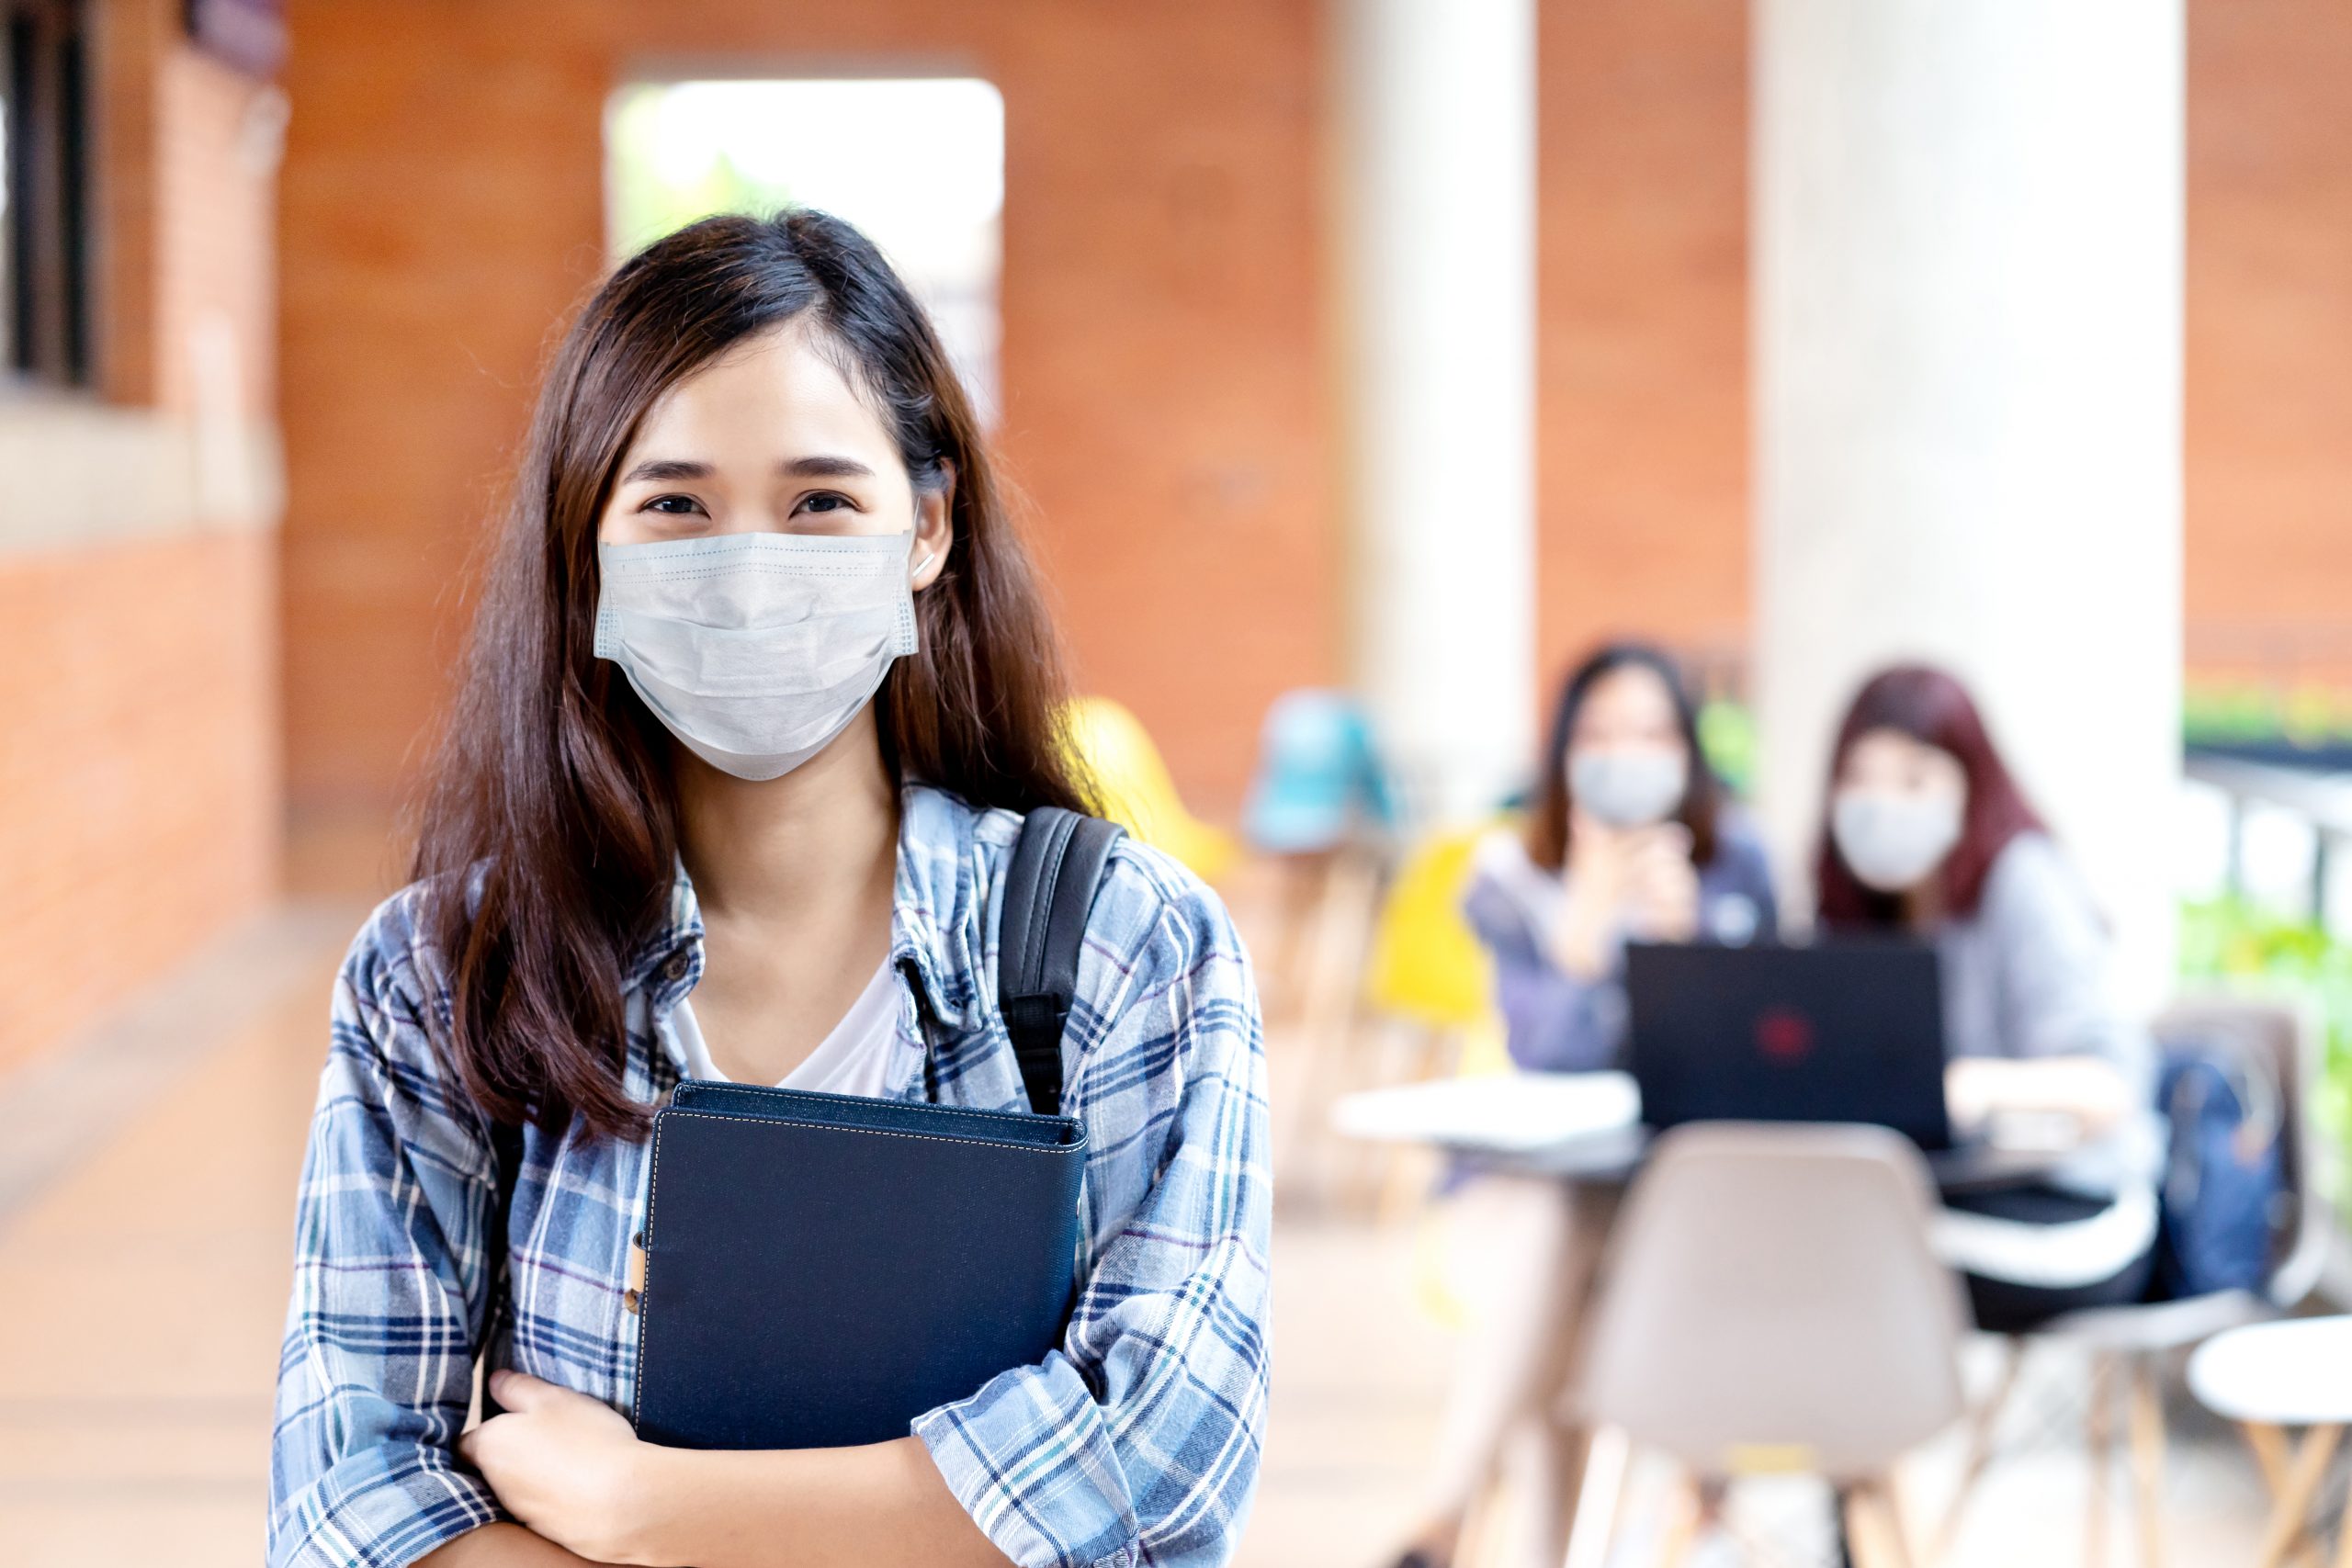 Teenage girl holding folder while wearing a mask and looking at the camera.